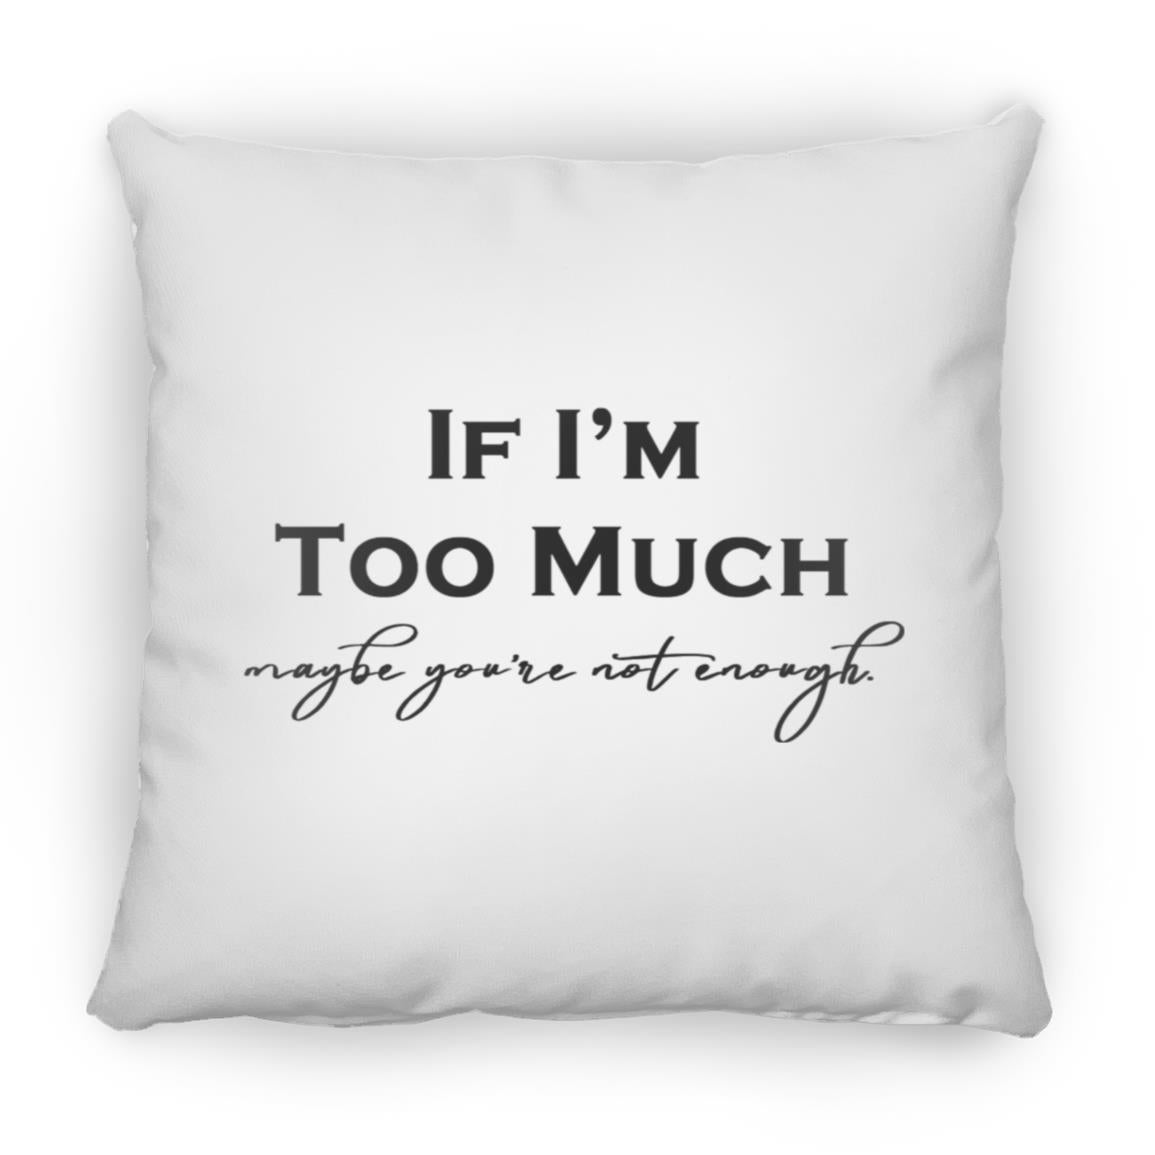 If I'm Too Much Throw Pillow